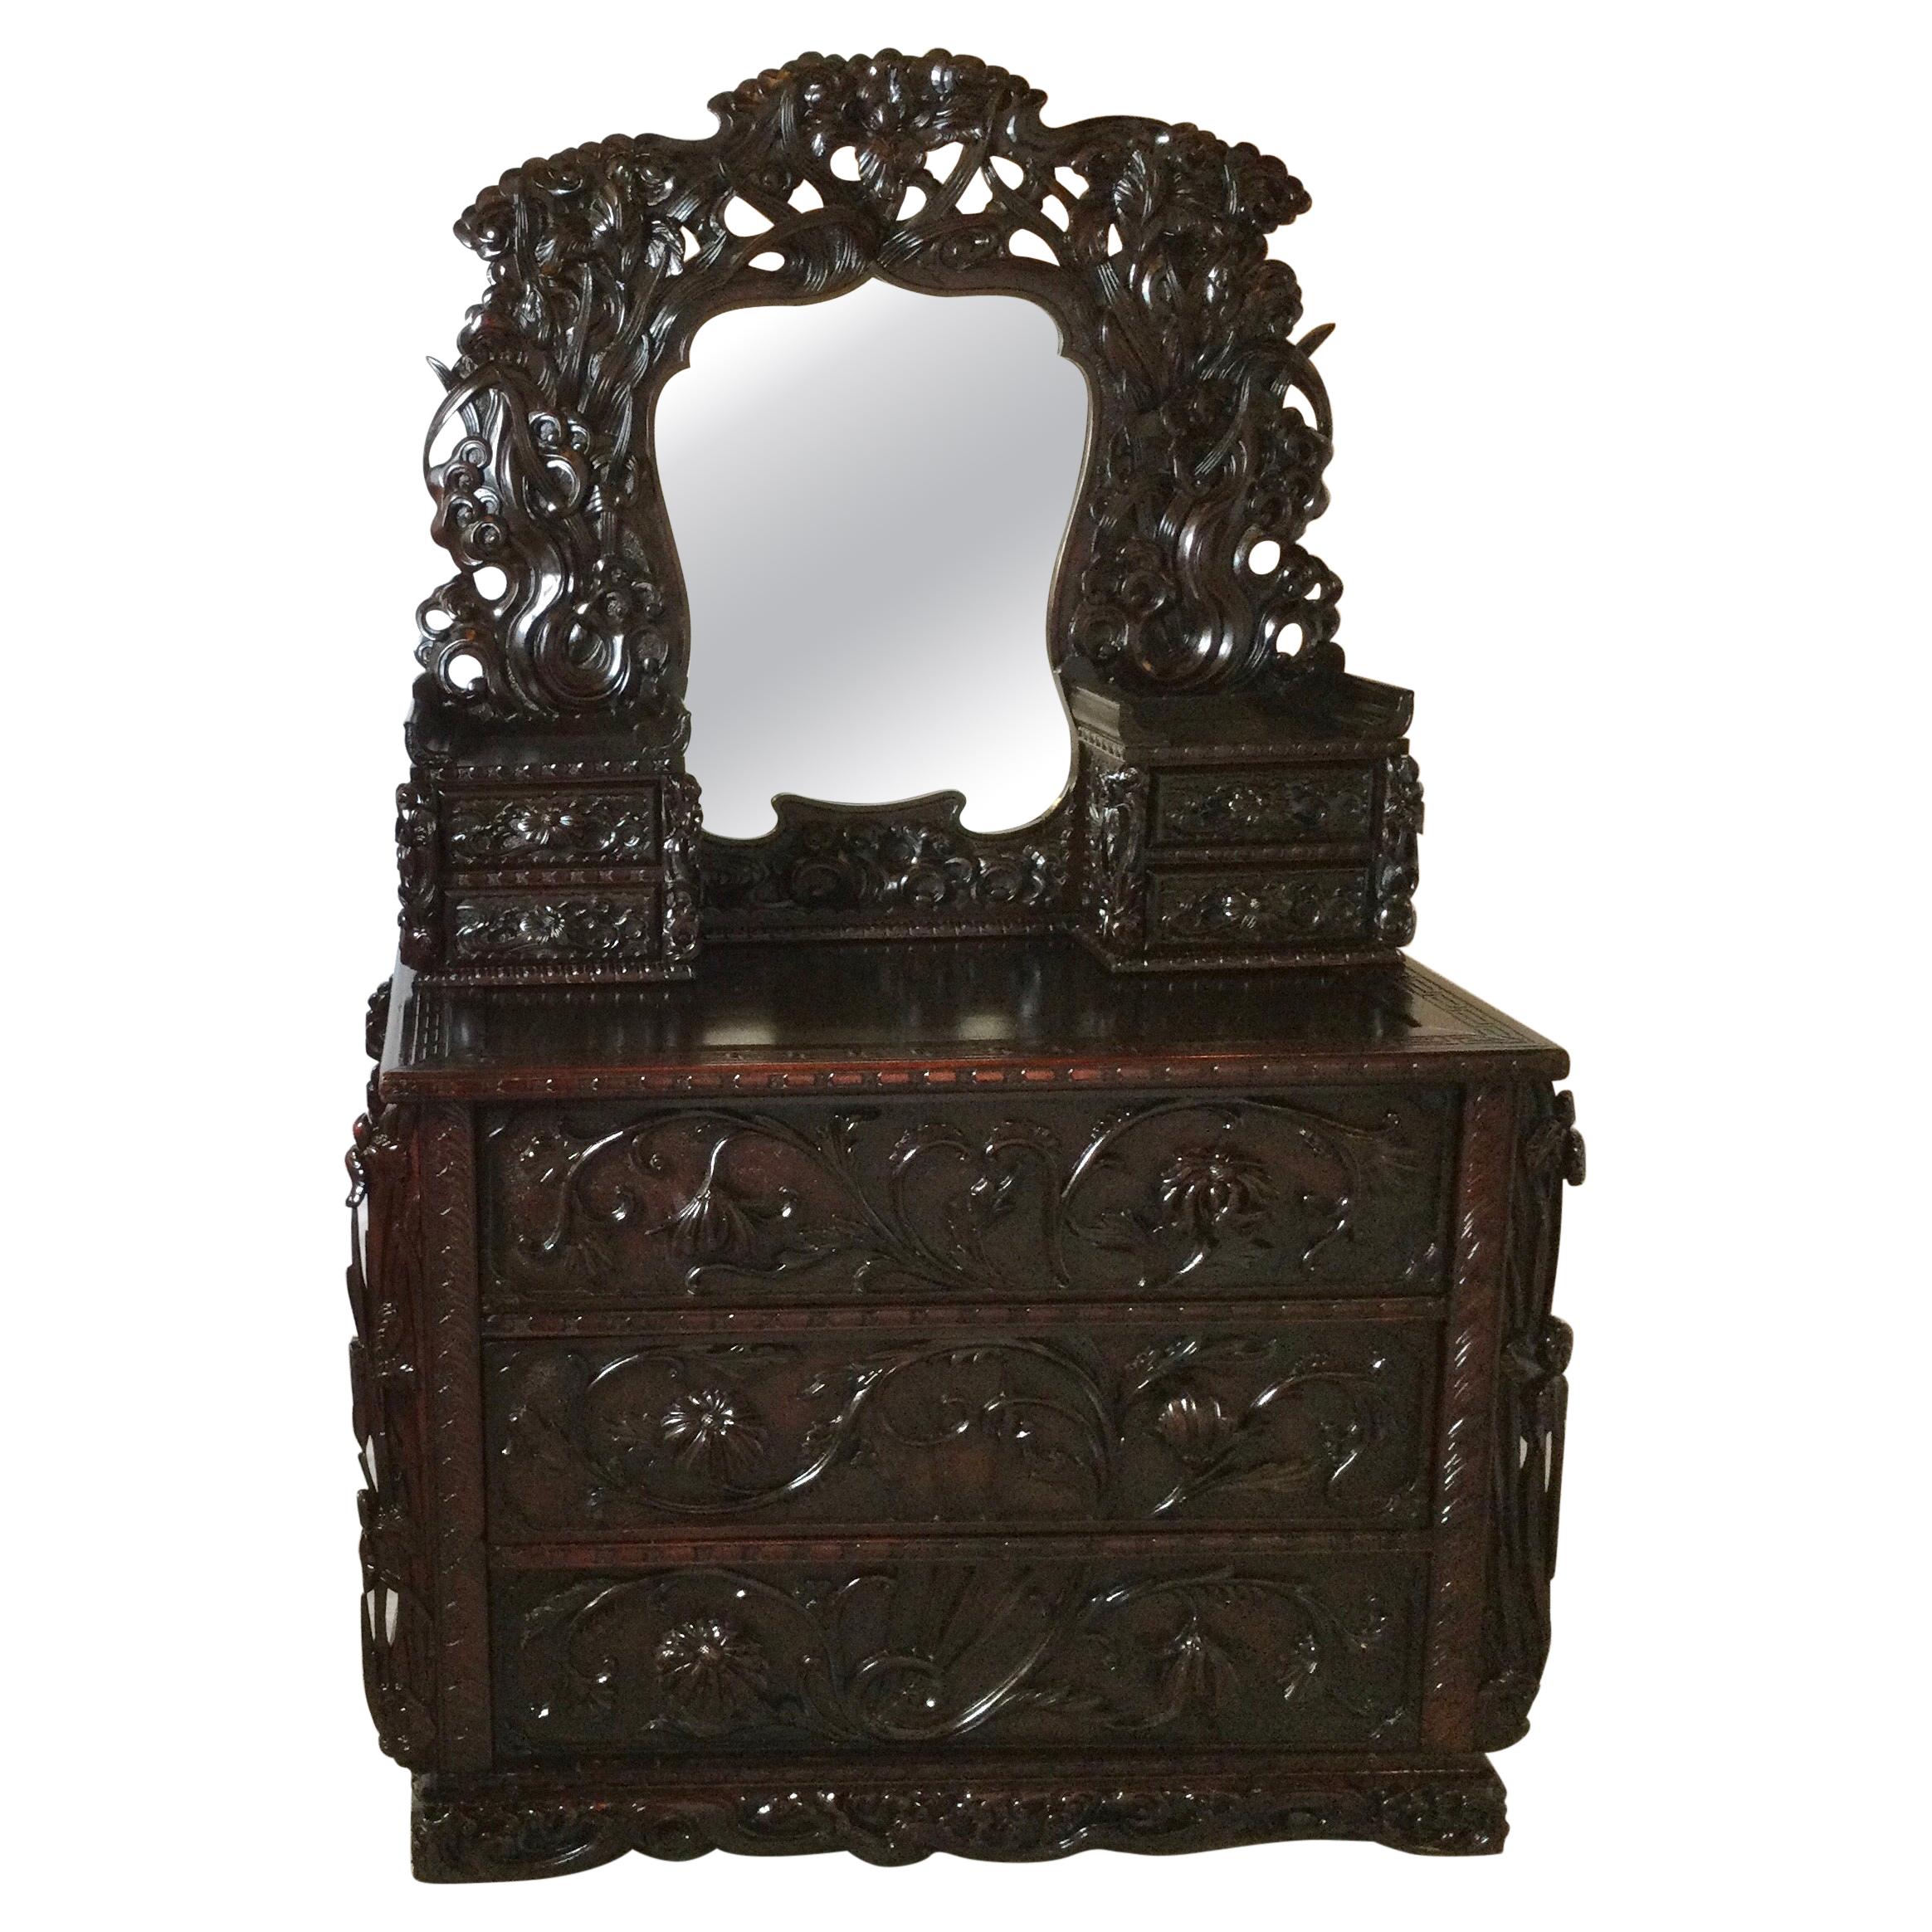 Early 20th C. Heavily Carved Japanese Chest of Drawers with Mirror